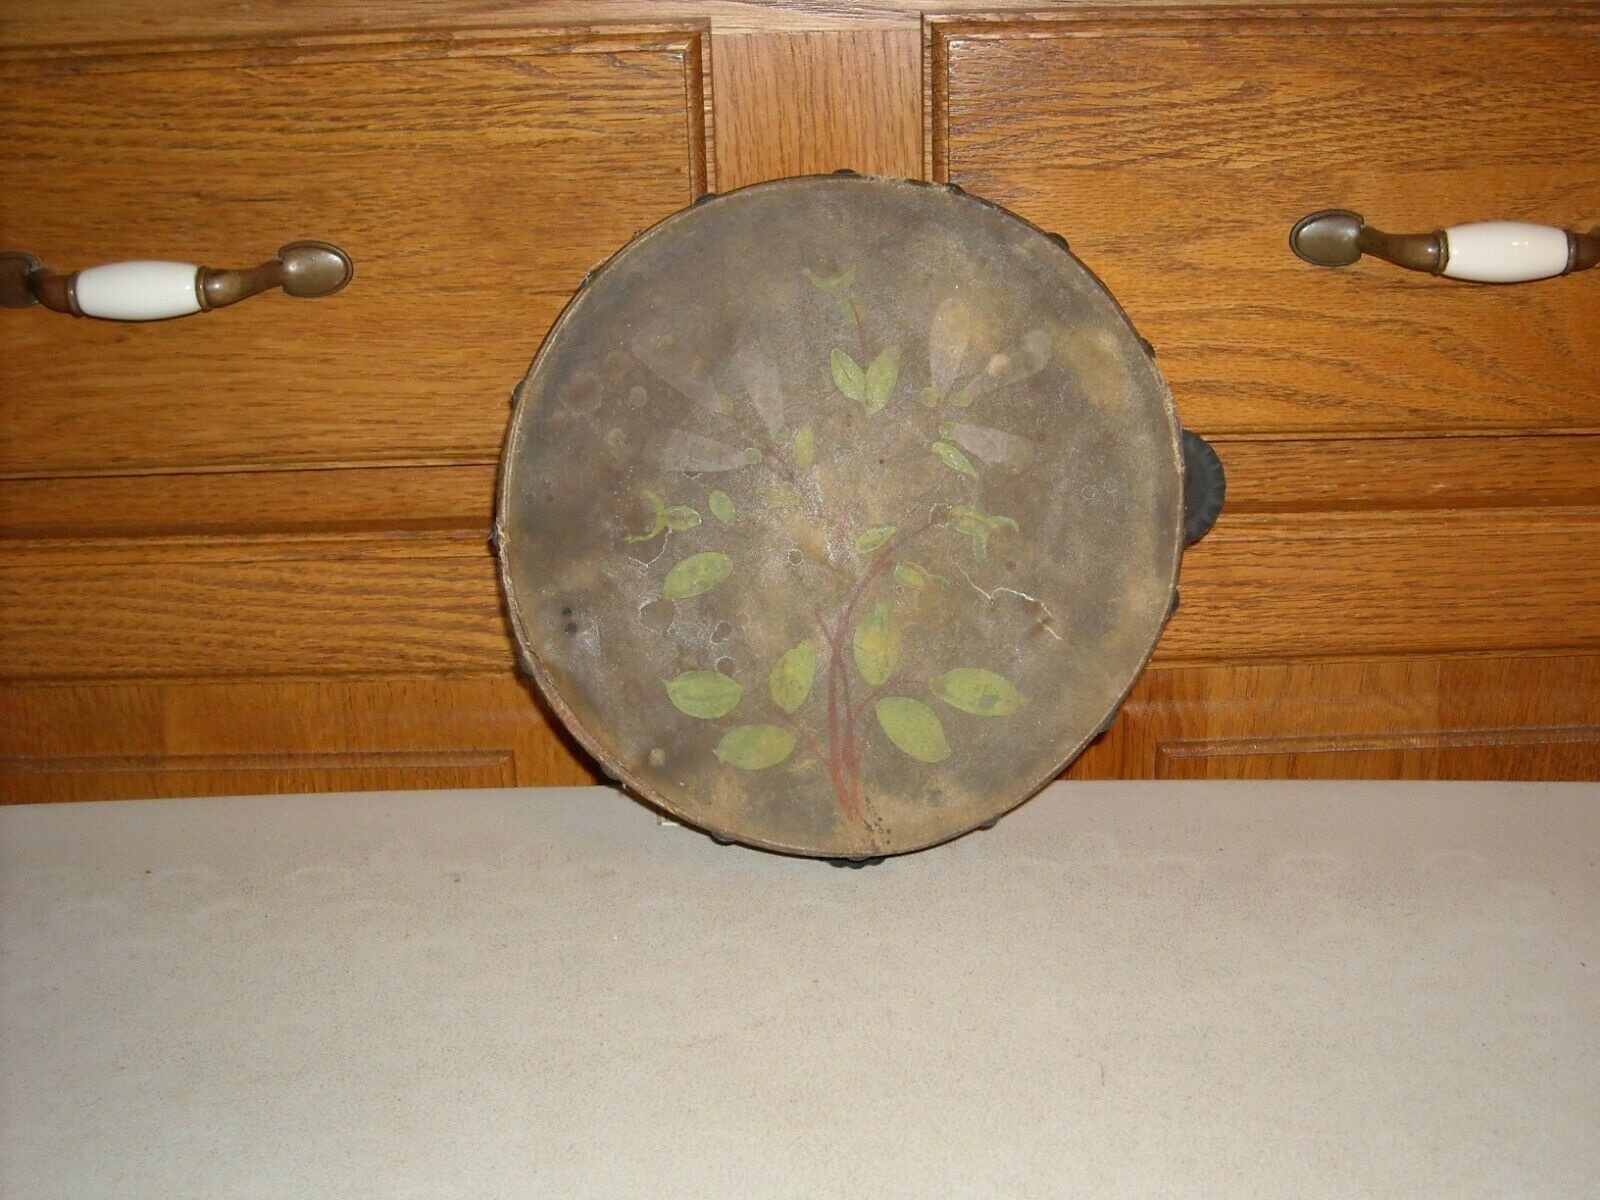 Antique / Vintage Tambourine Hand Painted Floral Oil Skin Top Great Rustic Decor